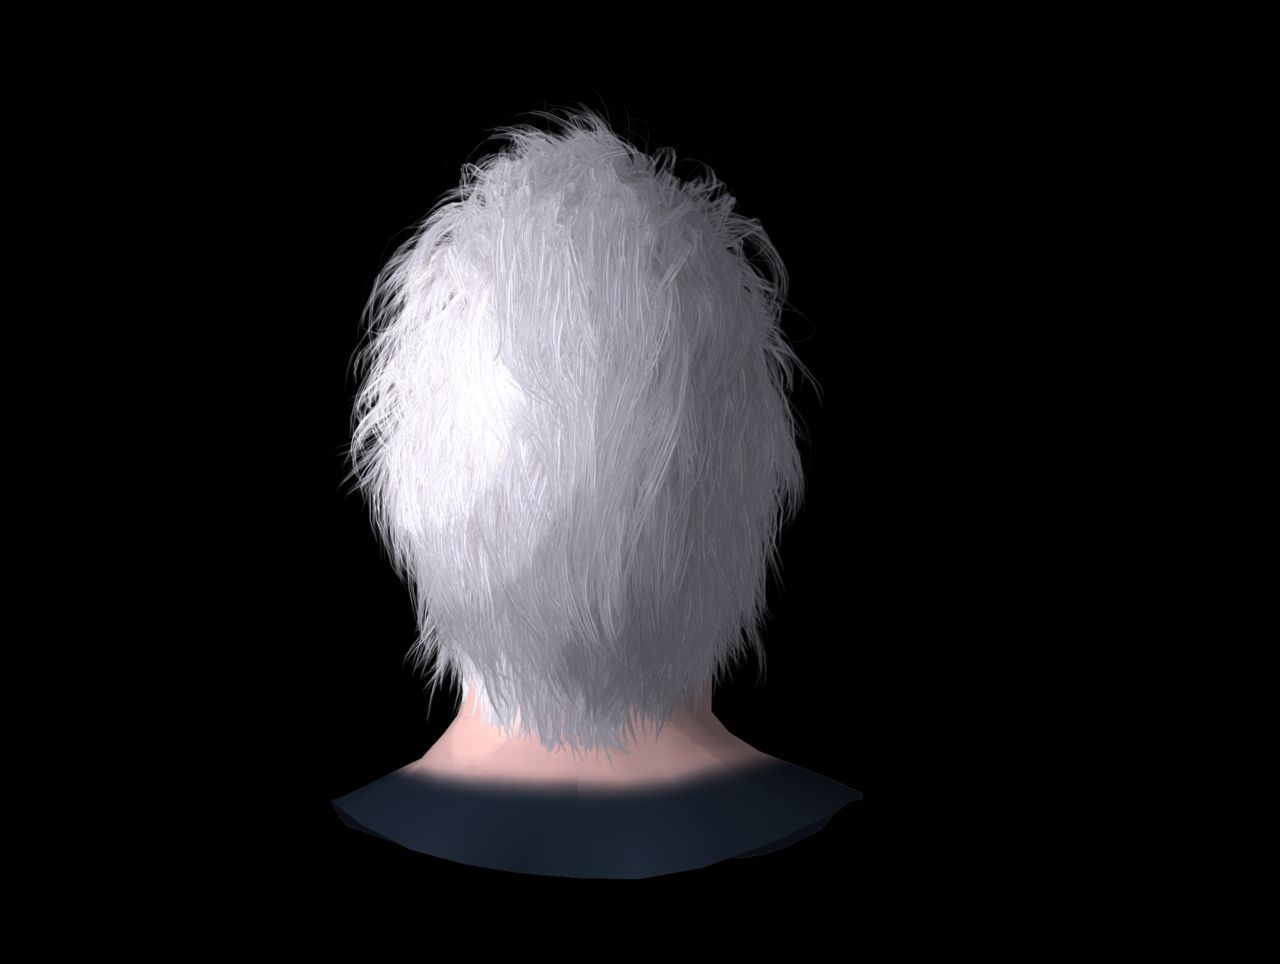 [J.A.] DMC5 | Vergil Head Reference PNG 34